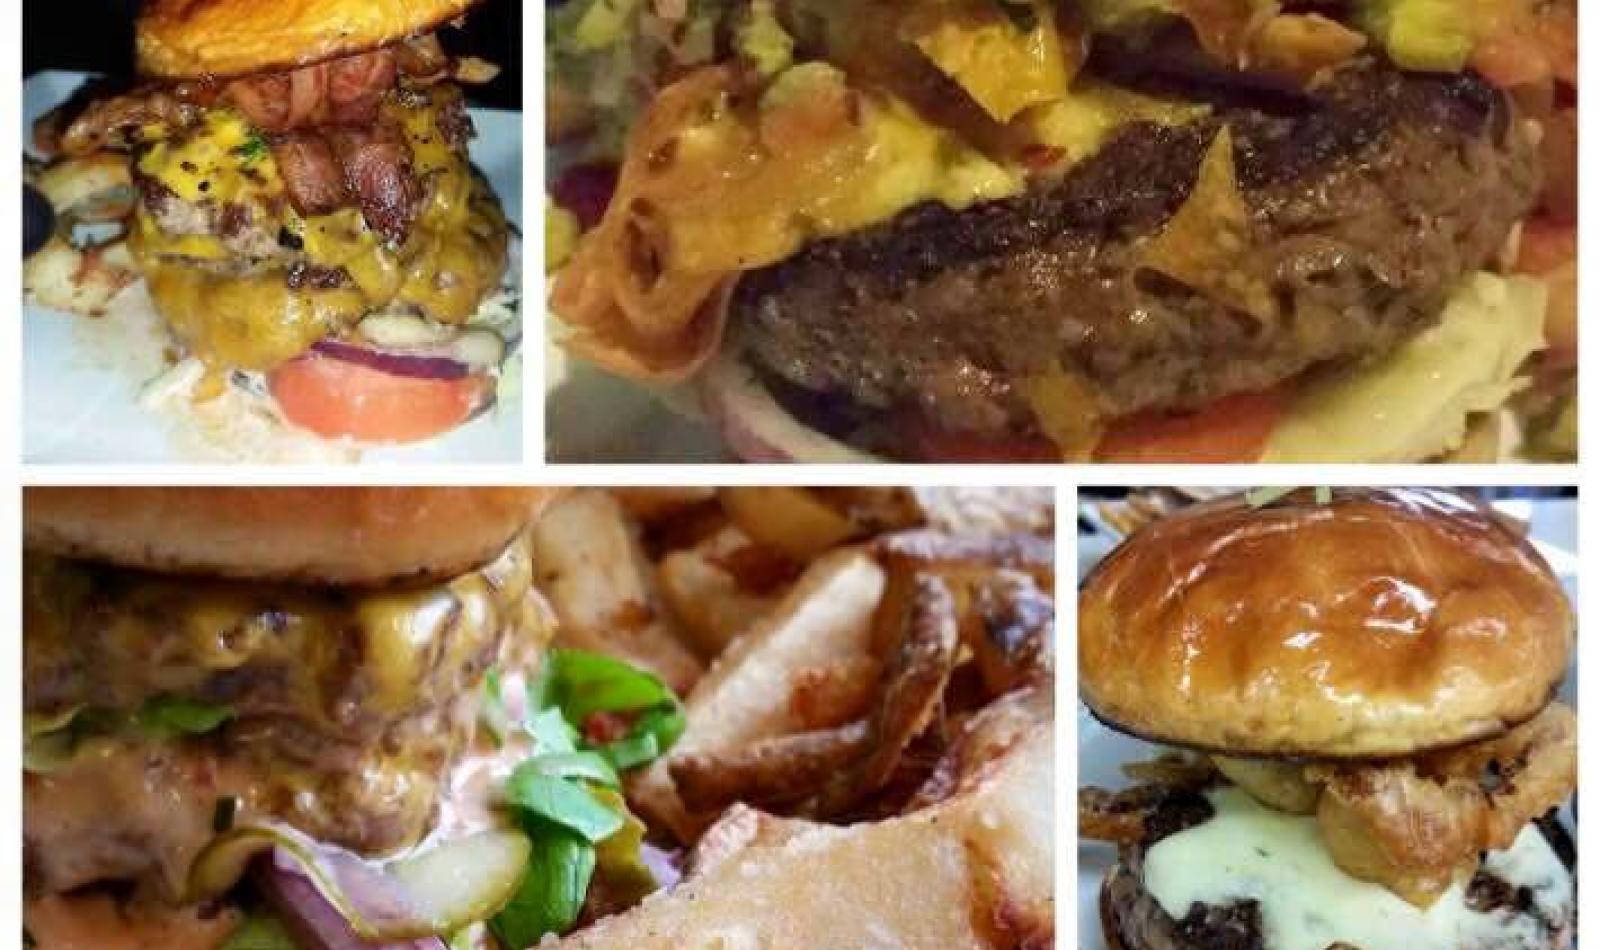 The Locals all have their favorite Pub Burger, find out yours!